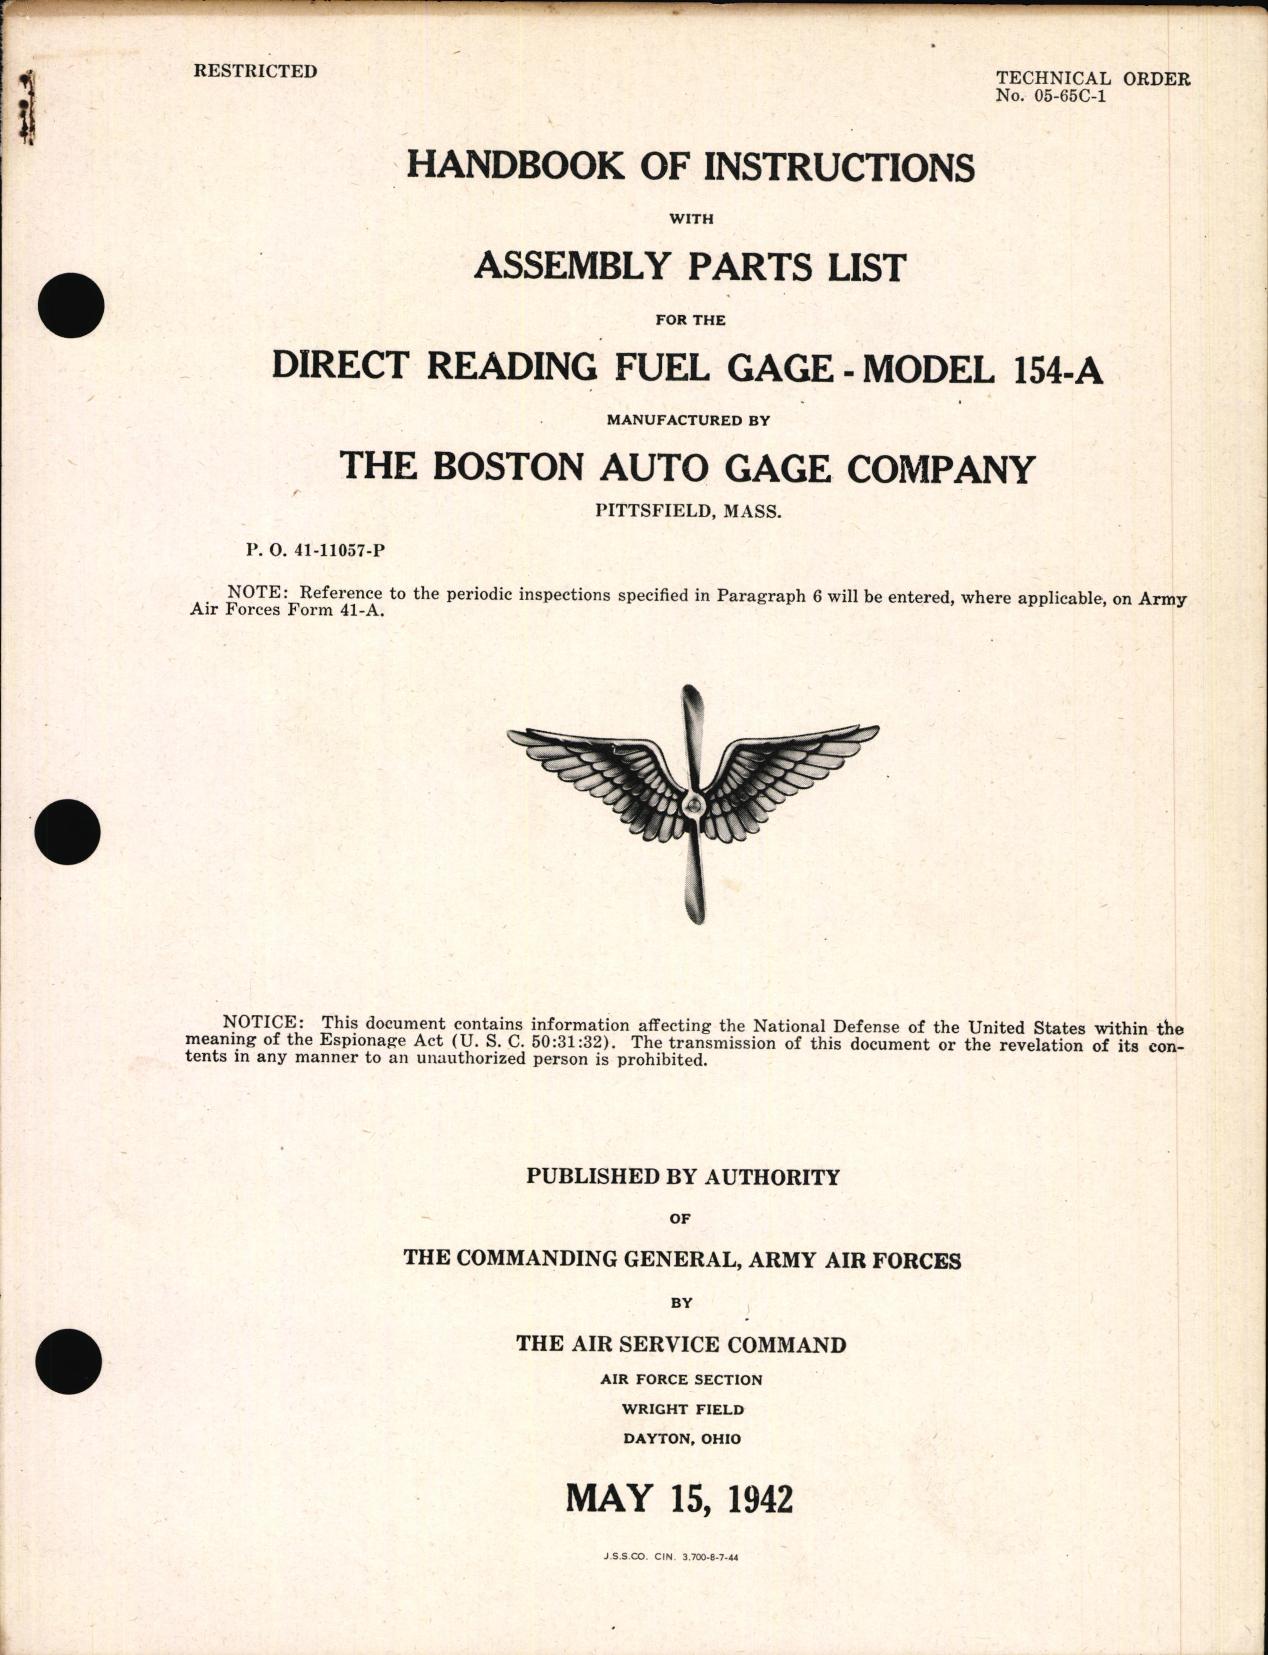 Sample page 1 from AirCorps Library document: Handbook of Instructions with Assembly Parts List for Direct Reading Fuel Gage Model 154-A